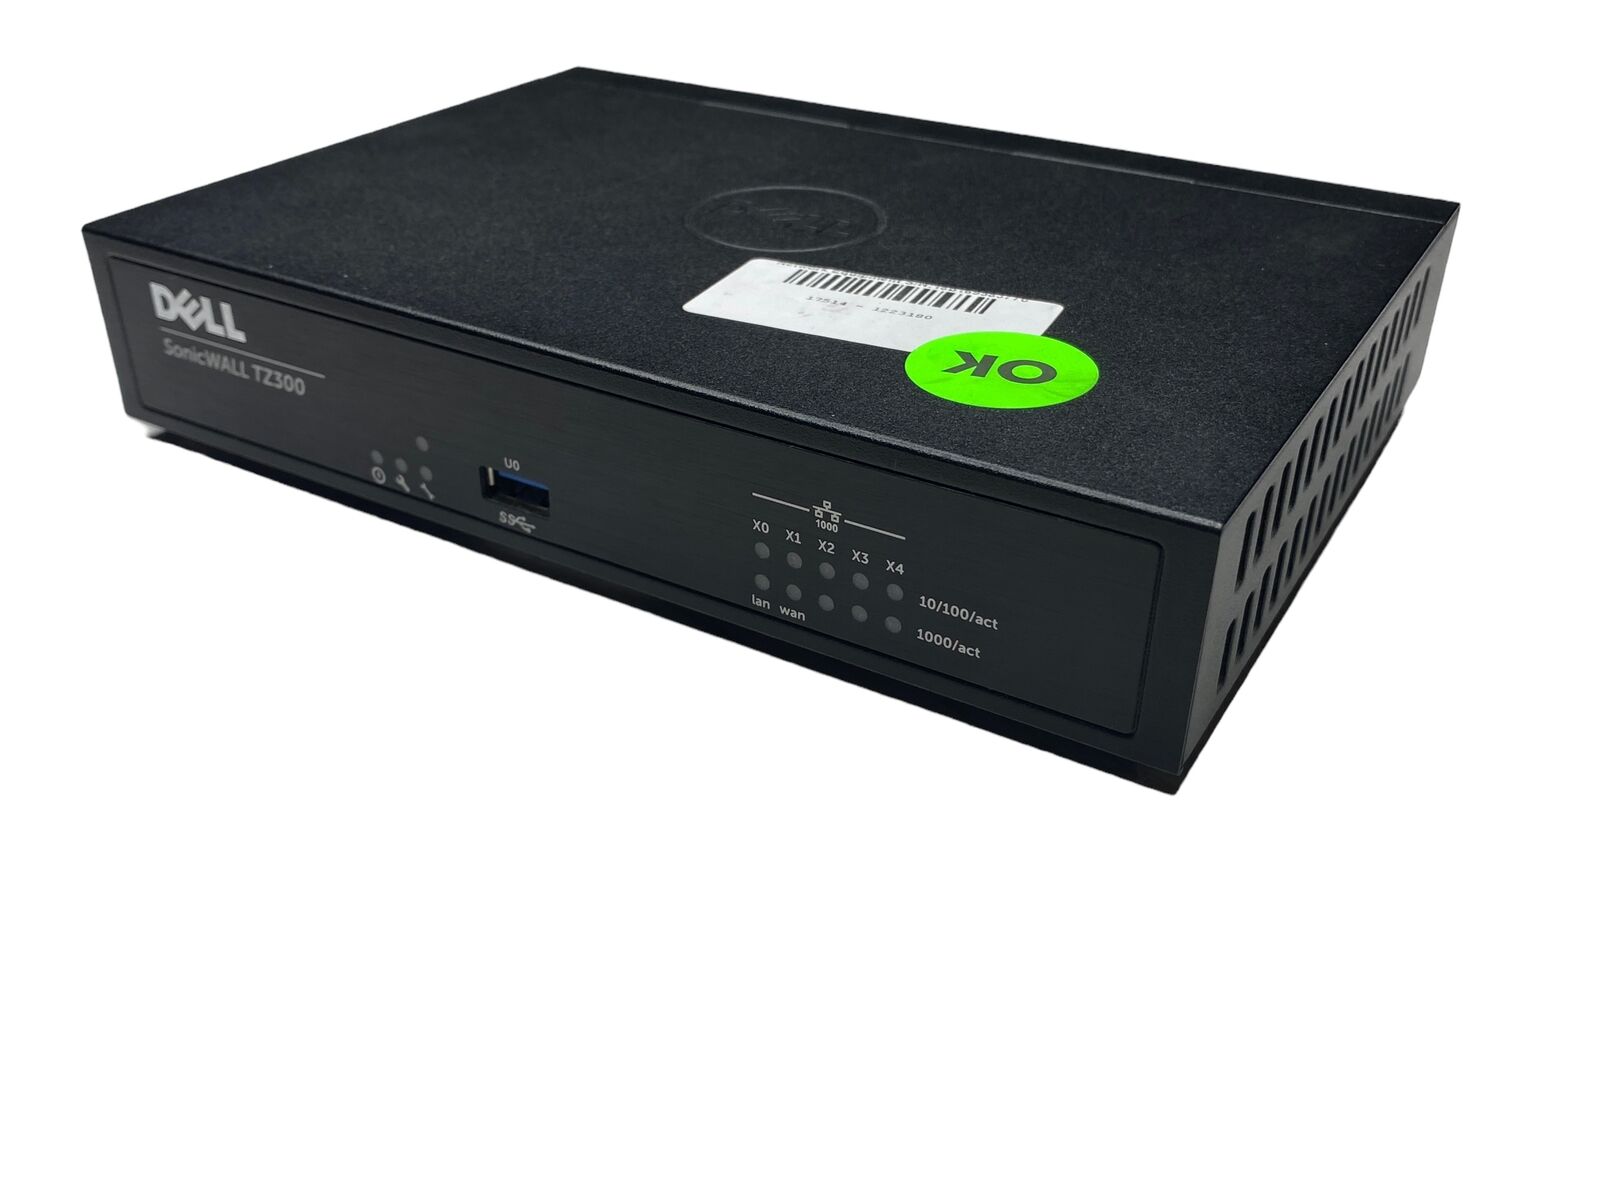 Dell SonicWALL TZ300 | Firewall Security Appliance